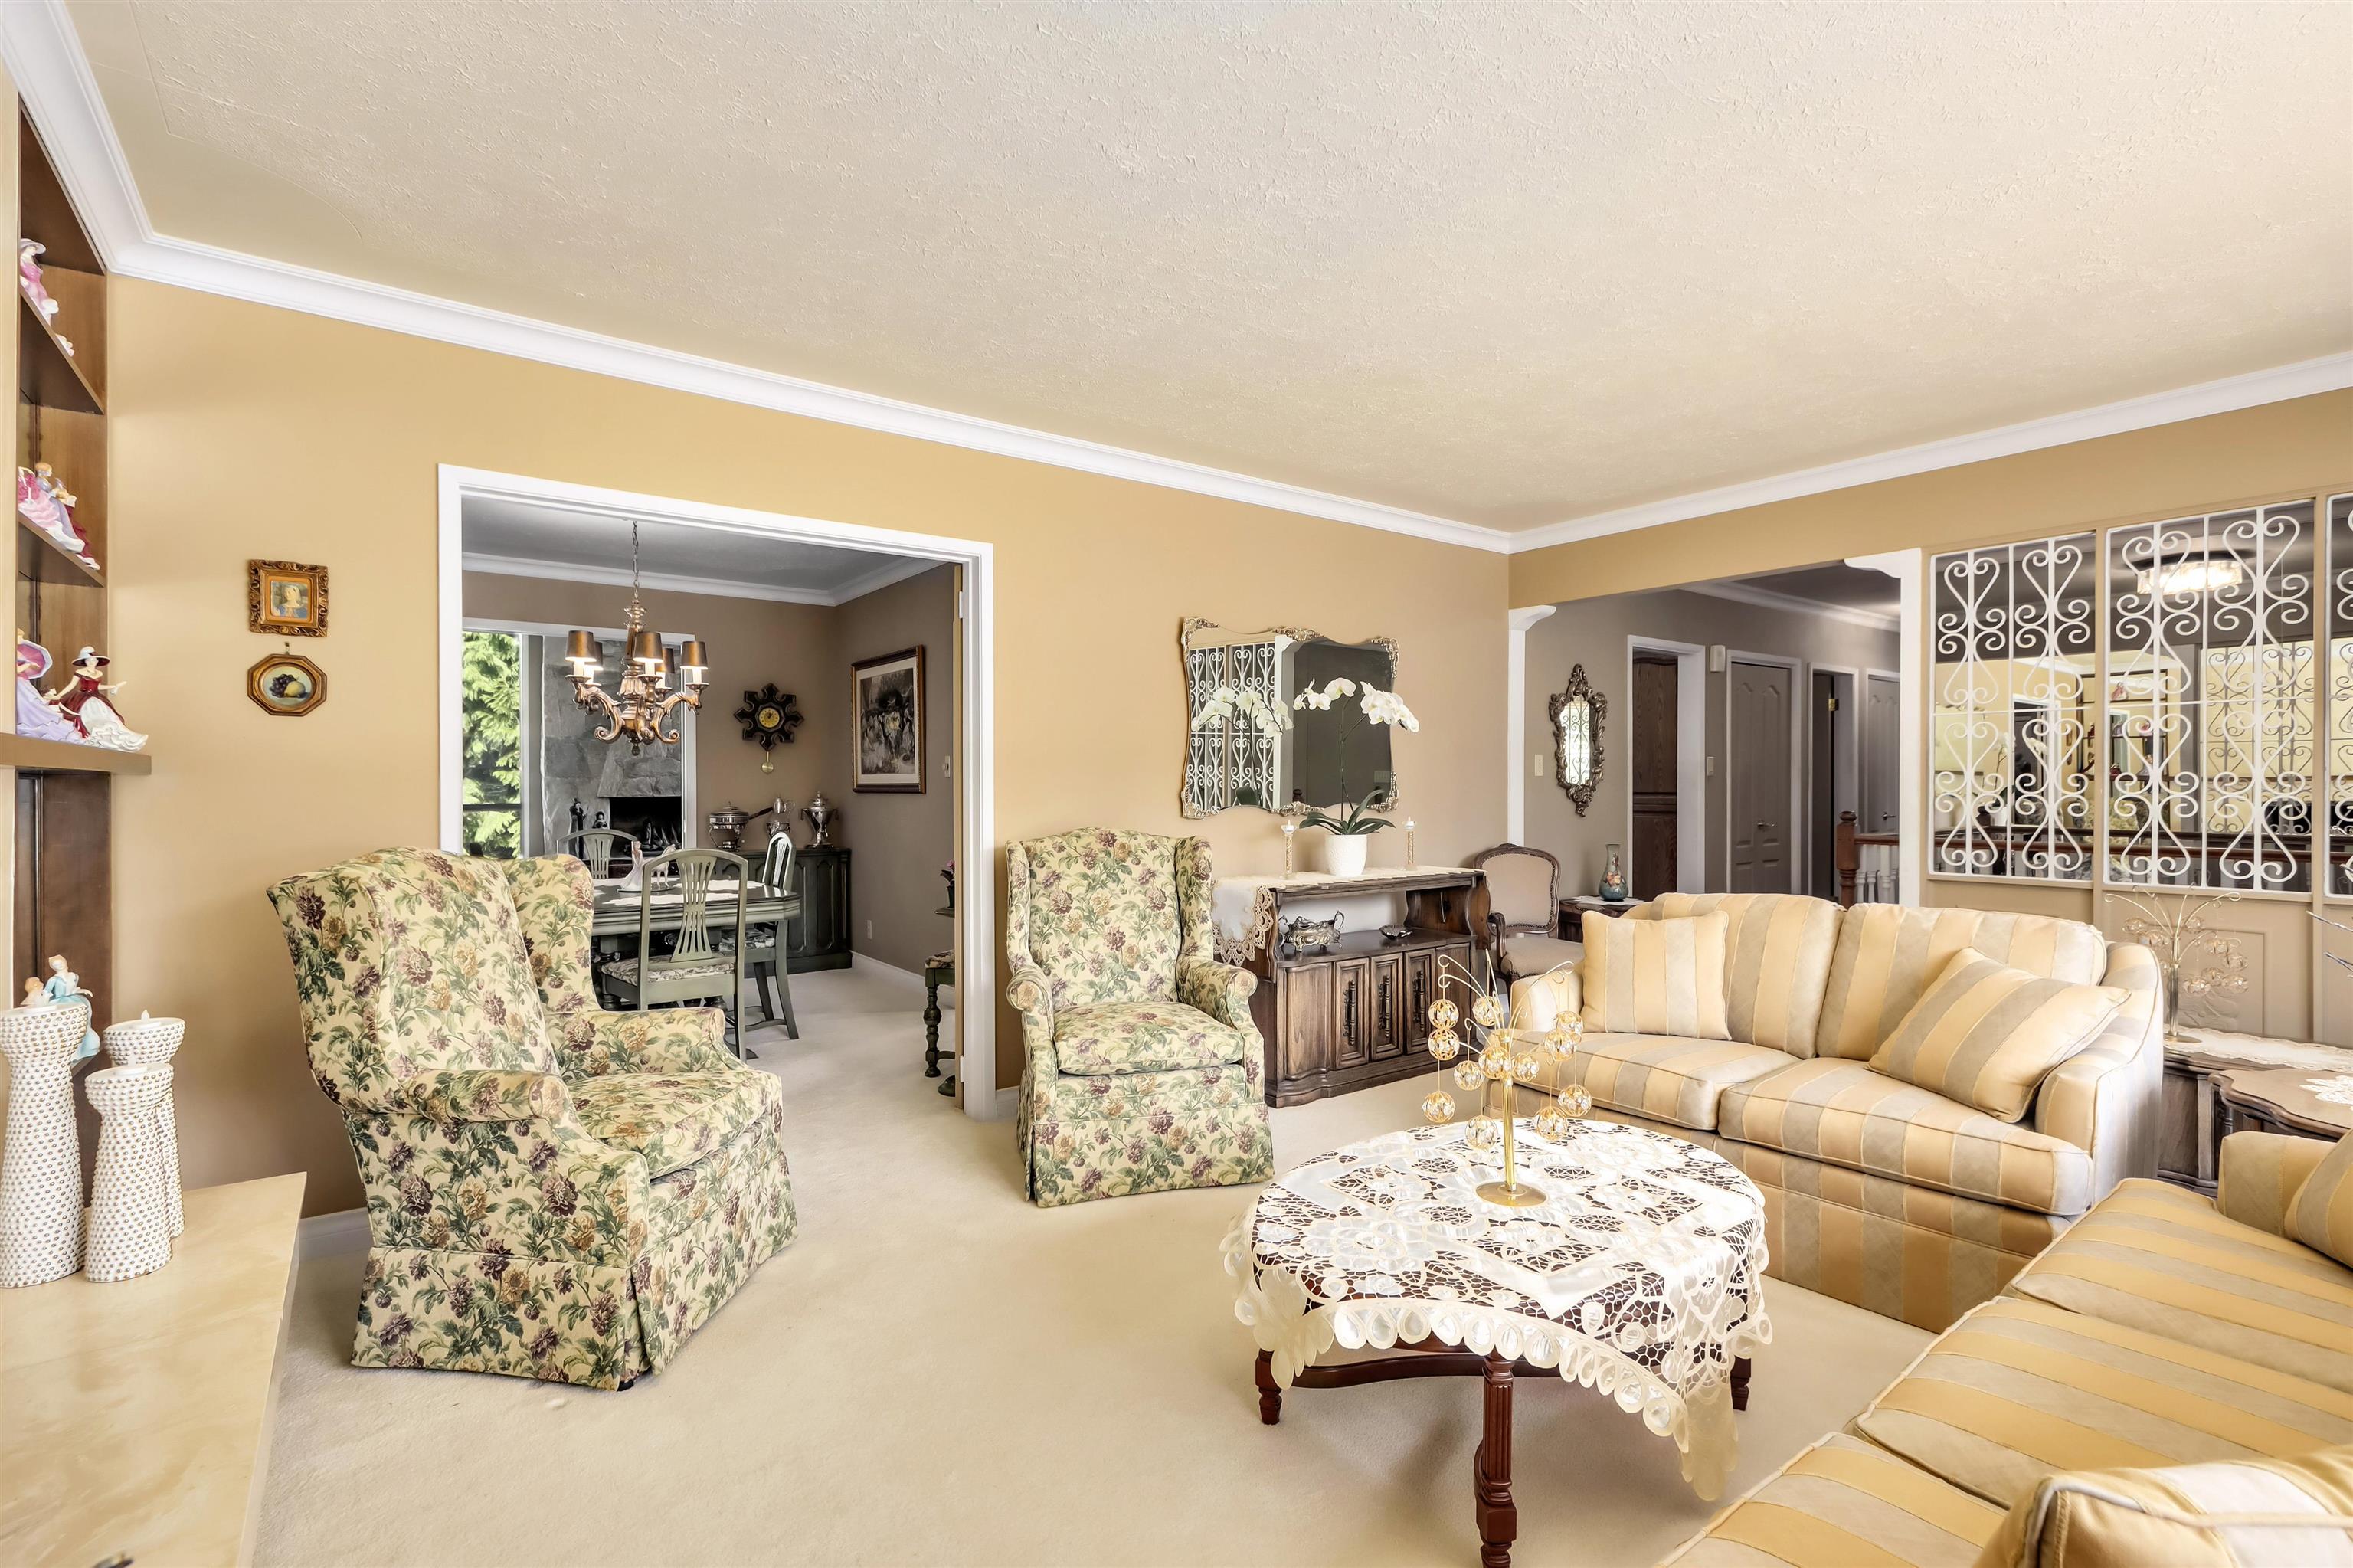 Listing image of 4343 PATTERDALE DRIVE